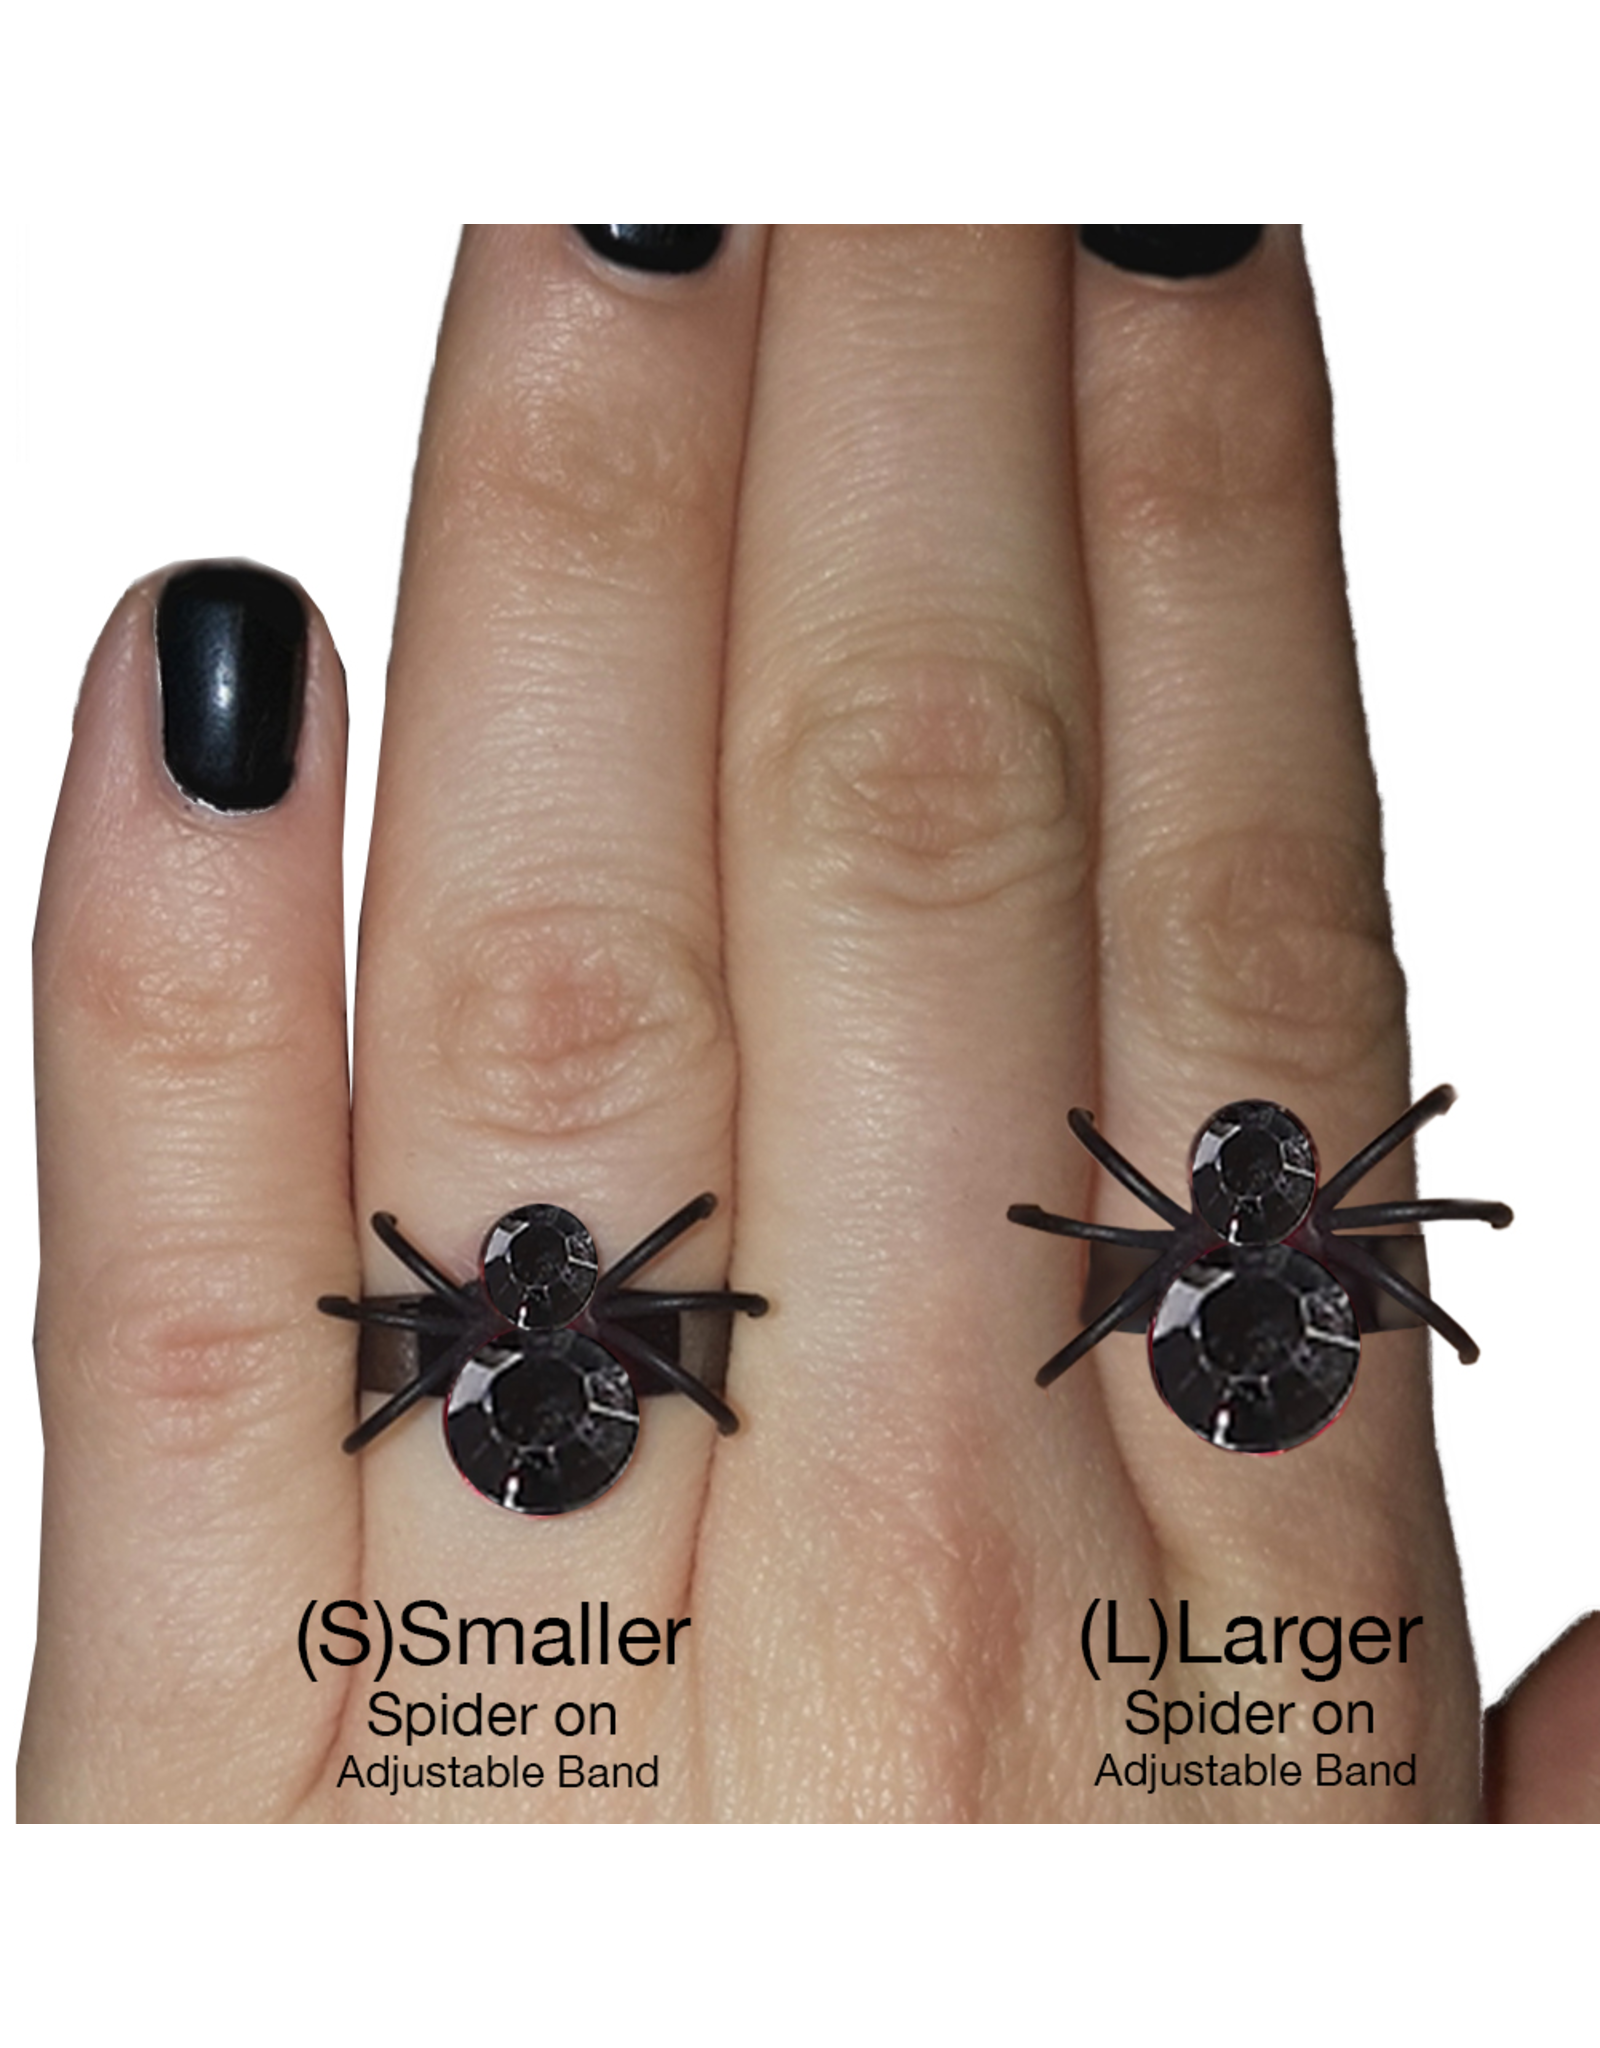 Twos Company Halloween Black Widow Bling Spider Ring .75 inch 0300-L-Black